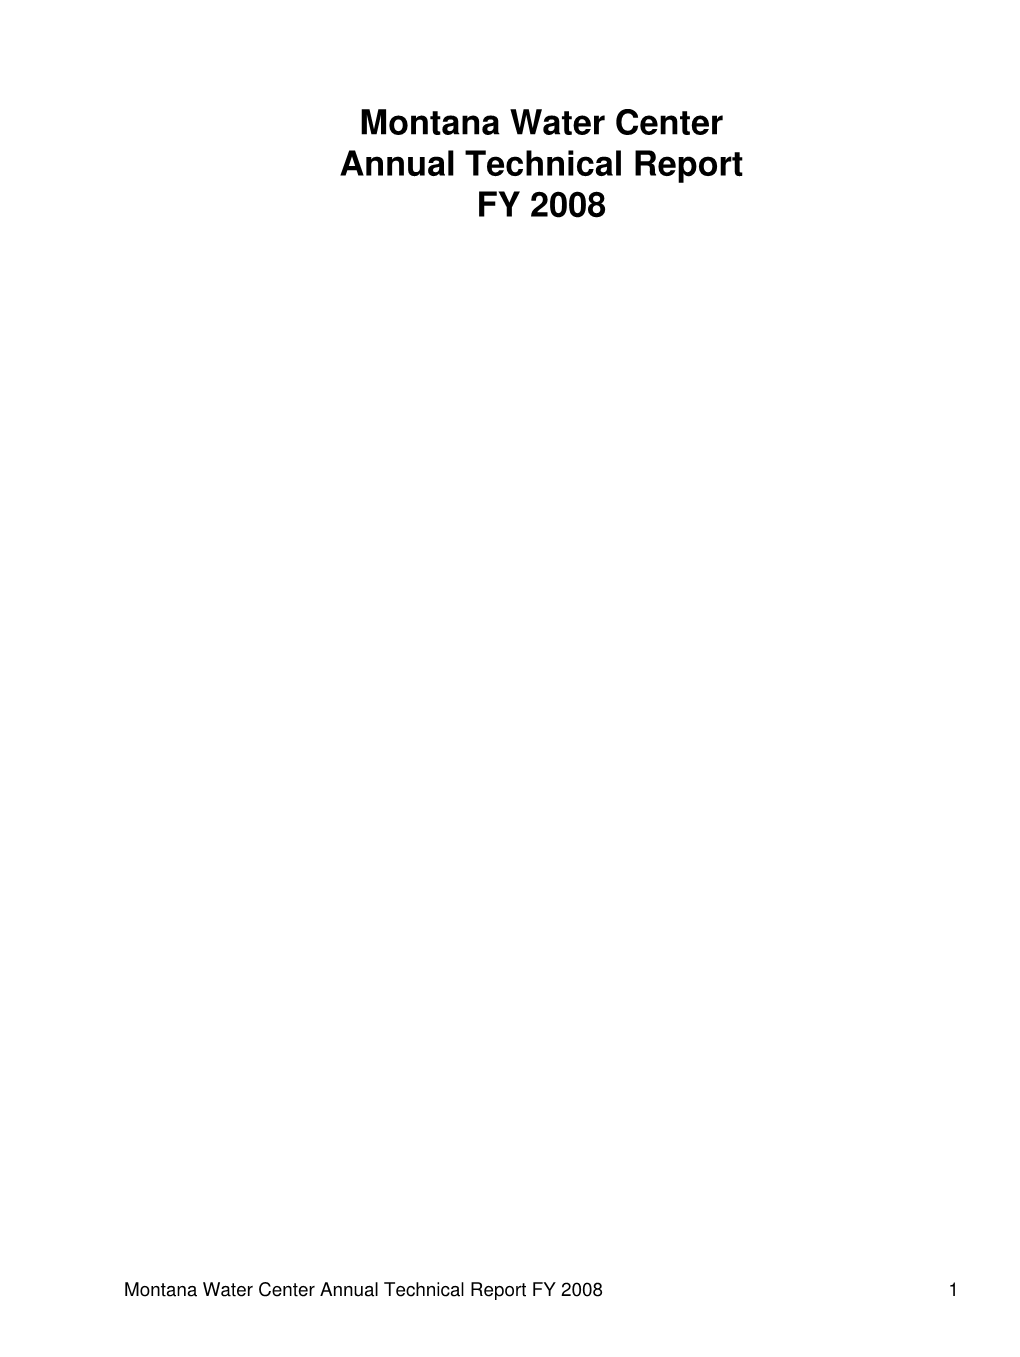 Montana Water Center Annual Technical Report FY 2008